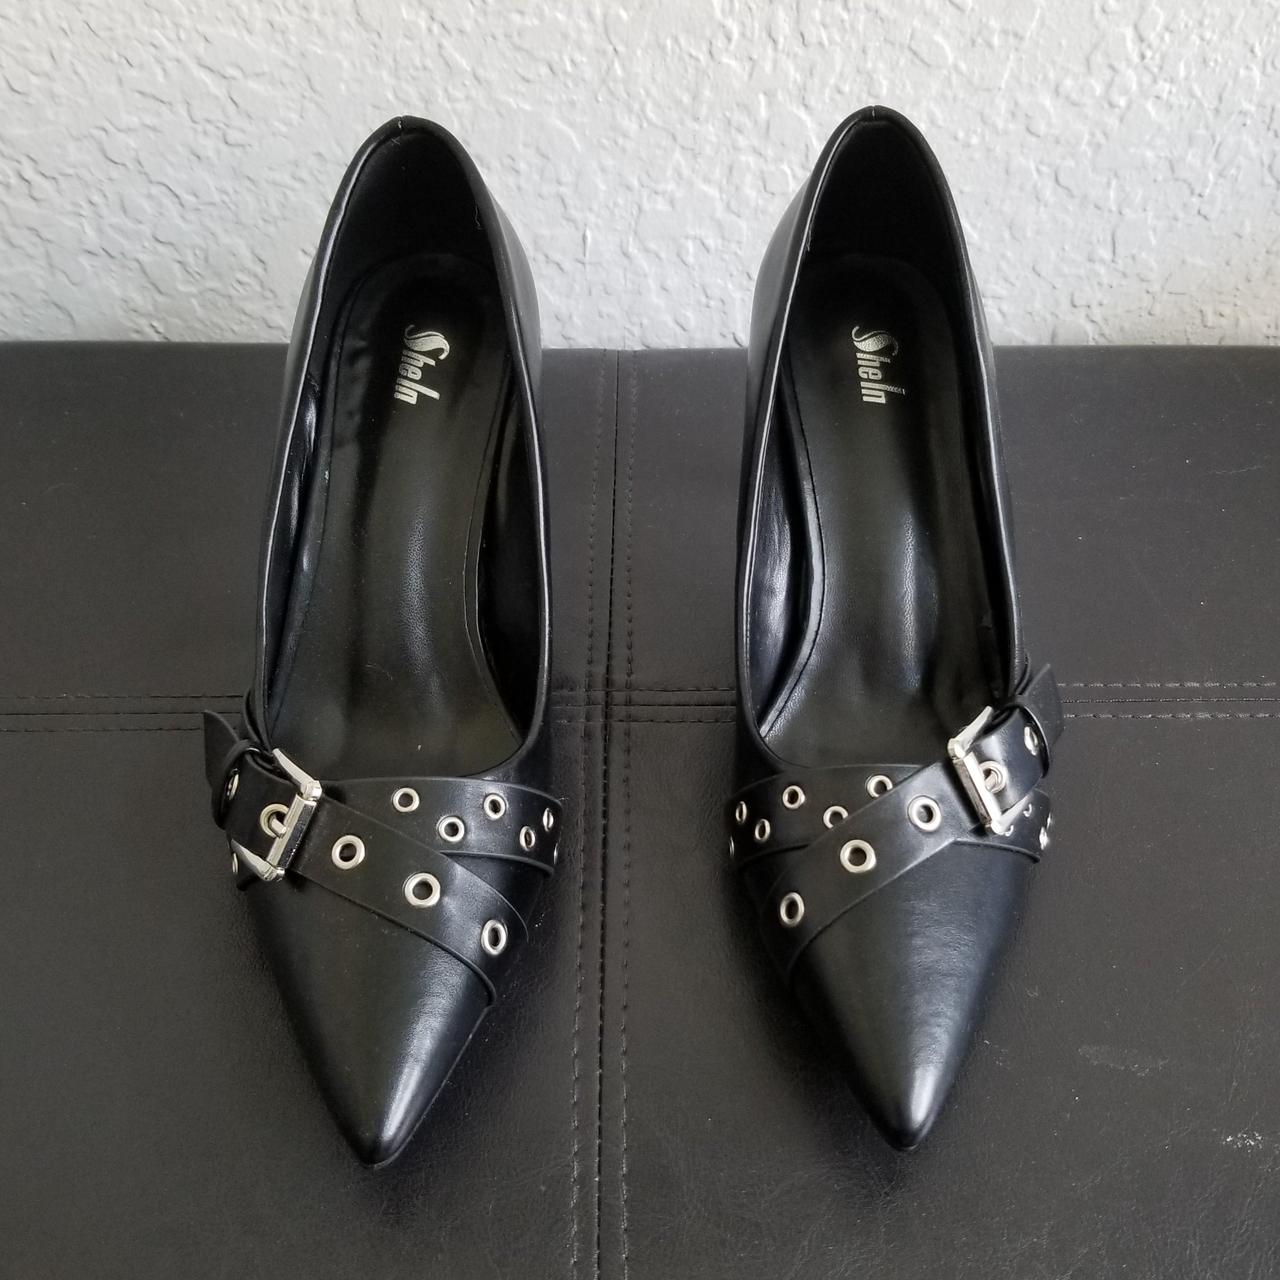 Super cute black high heels up for grabs! These have... - Depop